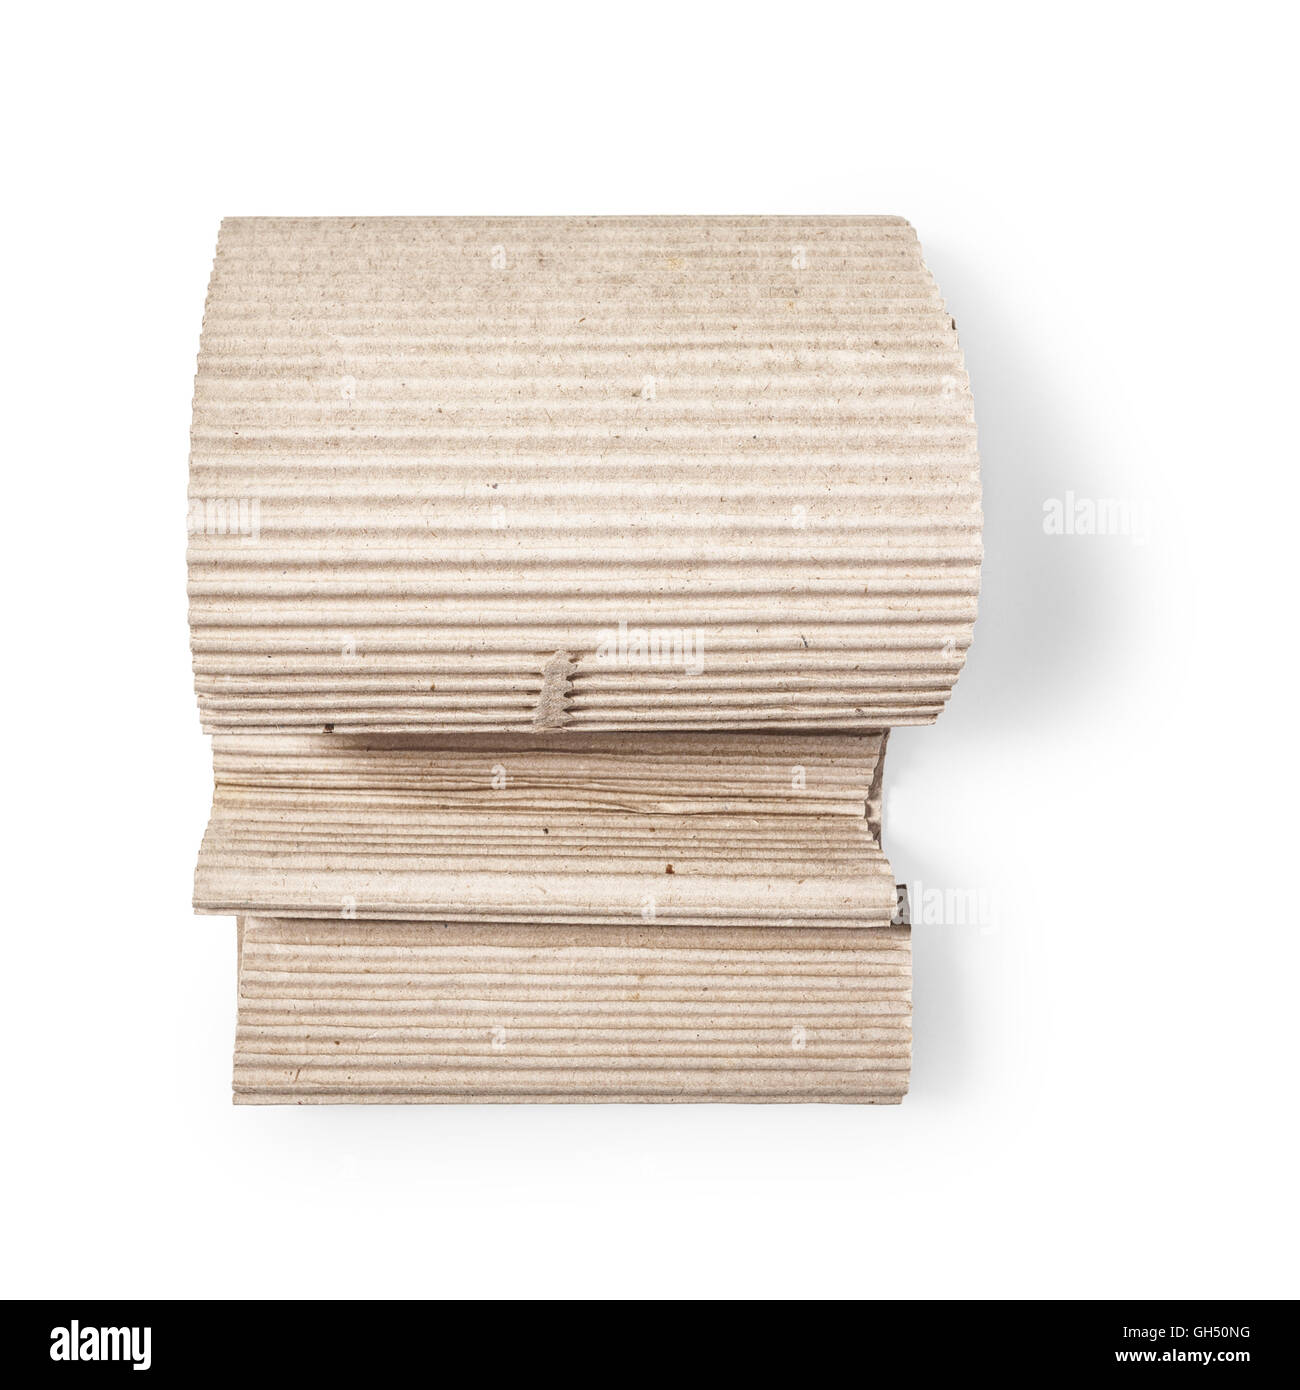 Corrugated cardboard role. Packaging material. Object isolated on white background with clipping path. Top view, flat lay Stock Photo